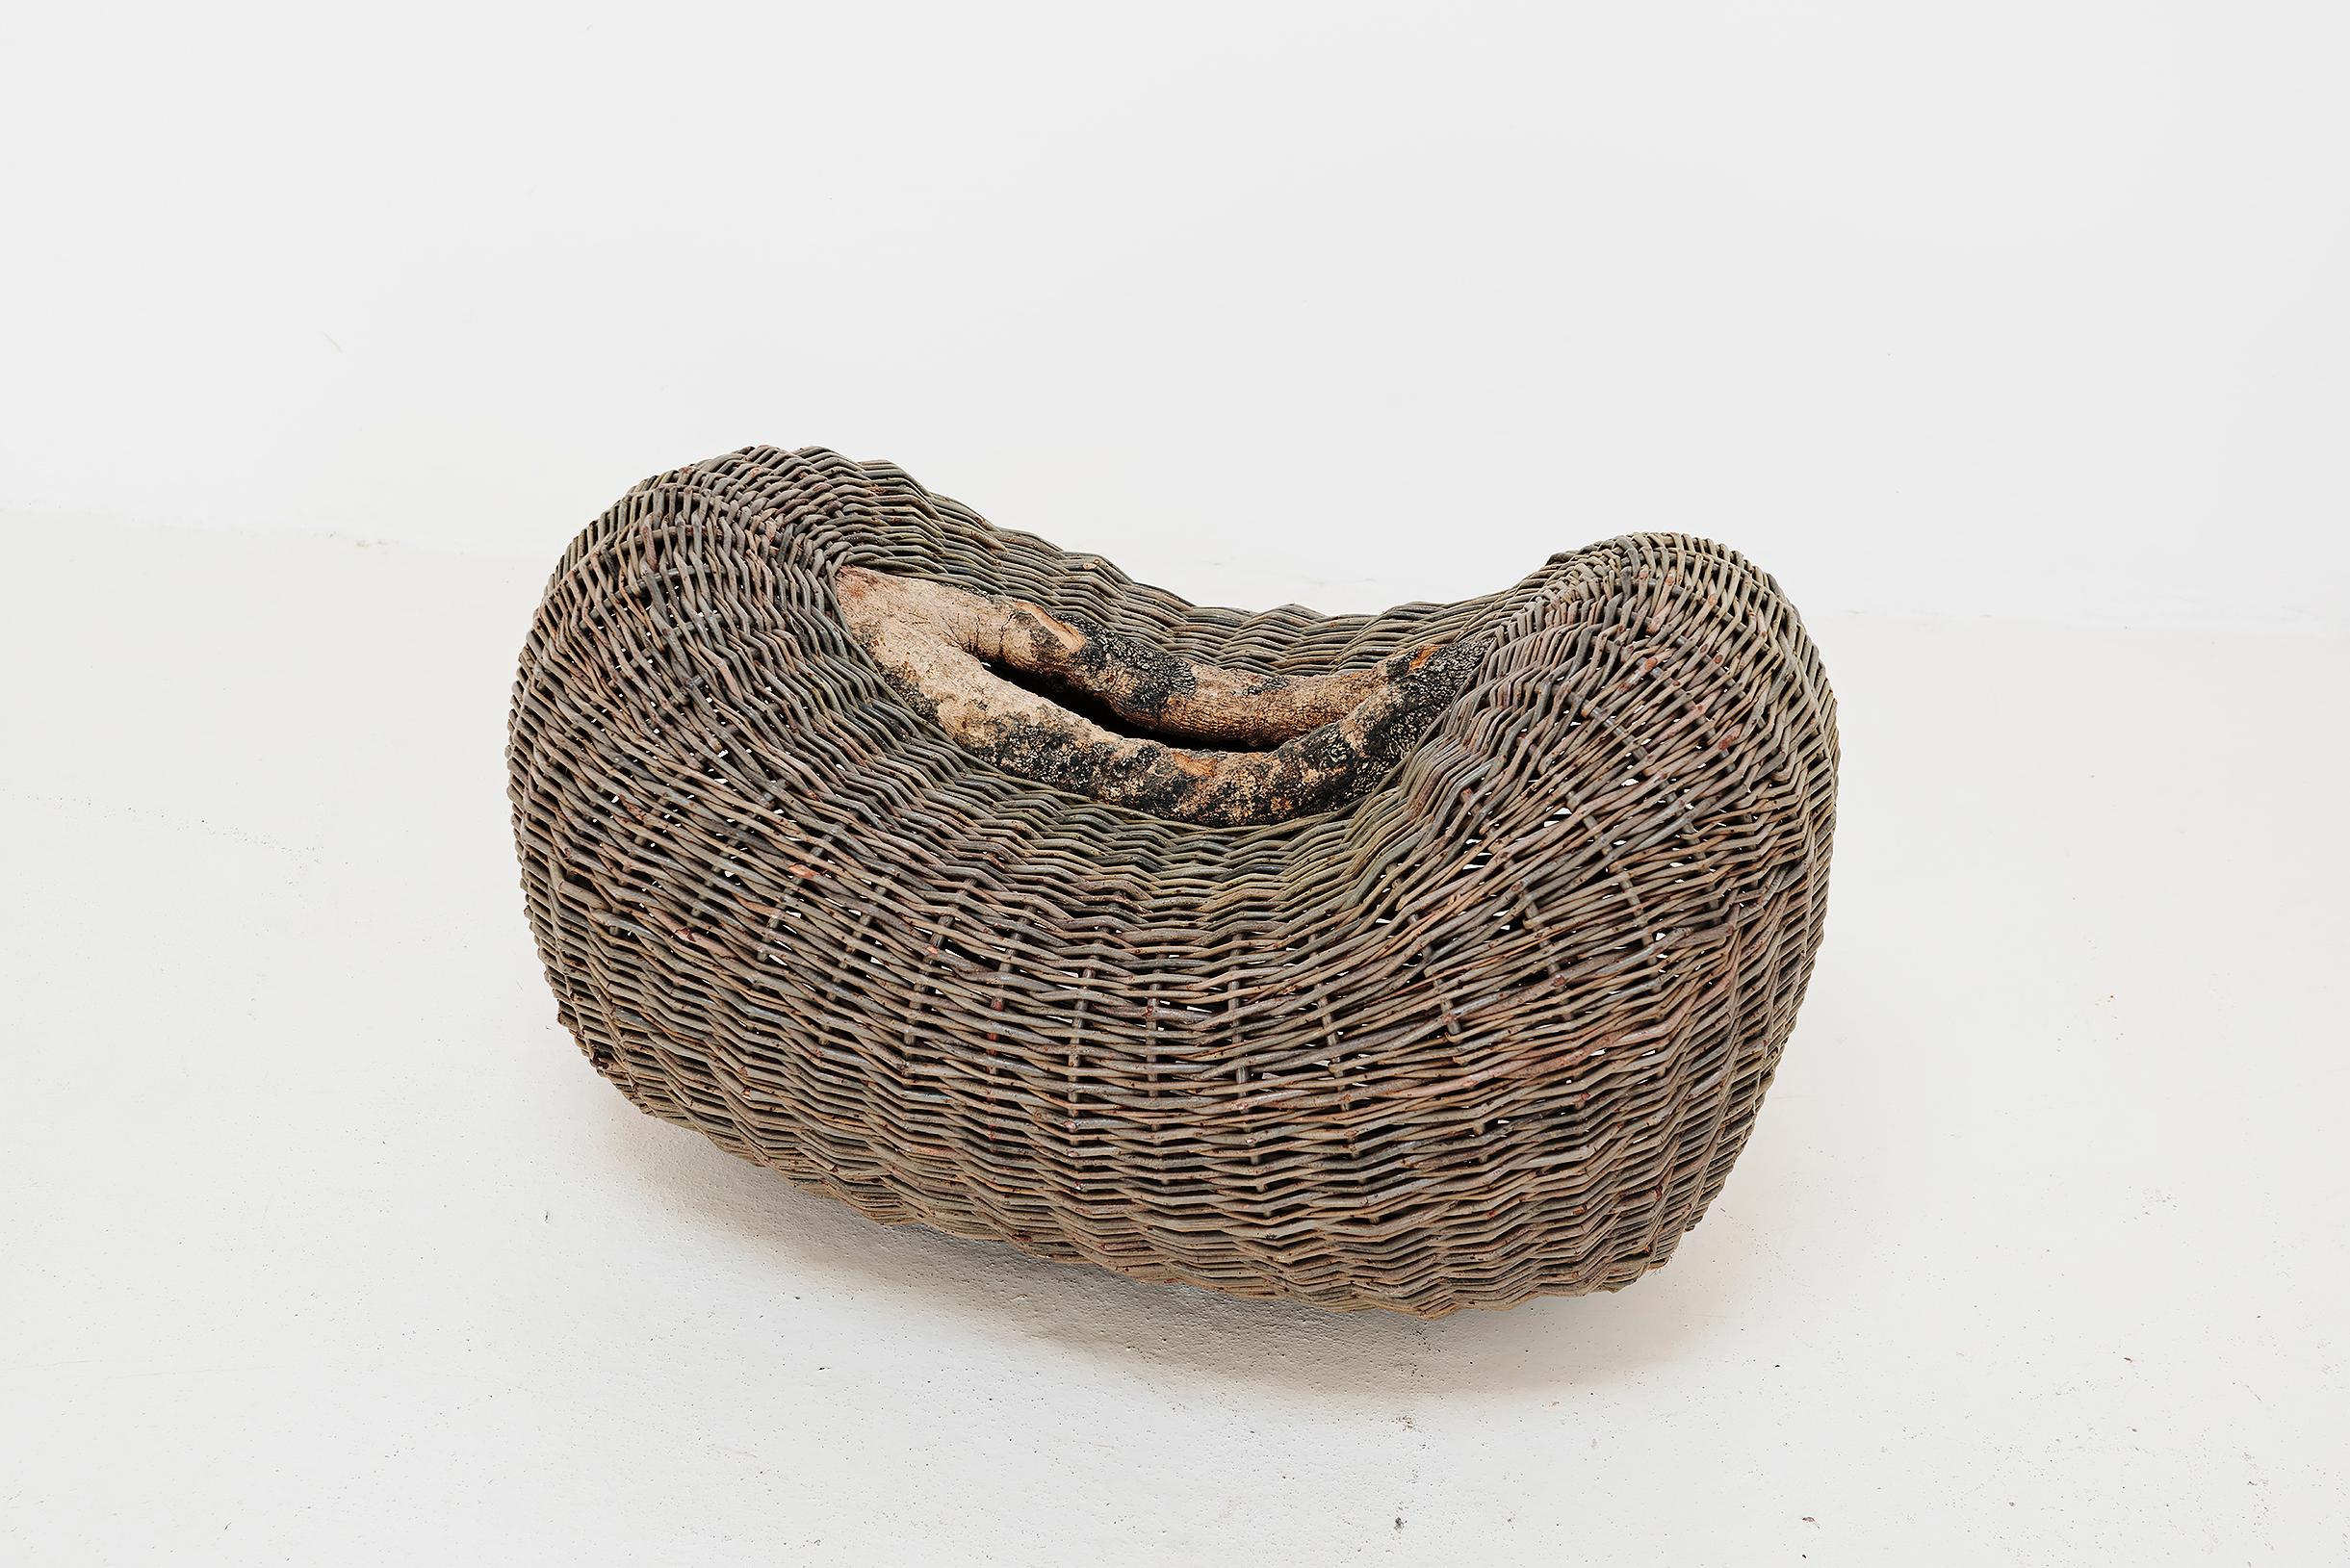 This basket by master basket-maker Joe Hogan showcases his deep understanding between material, craft and place. Using materials grown or found himself, Hogan works with over 20 different varieties of willow, harvesting annually from late November